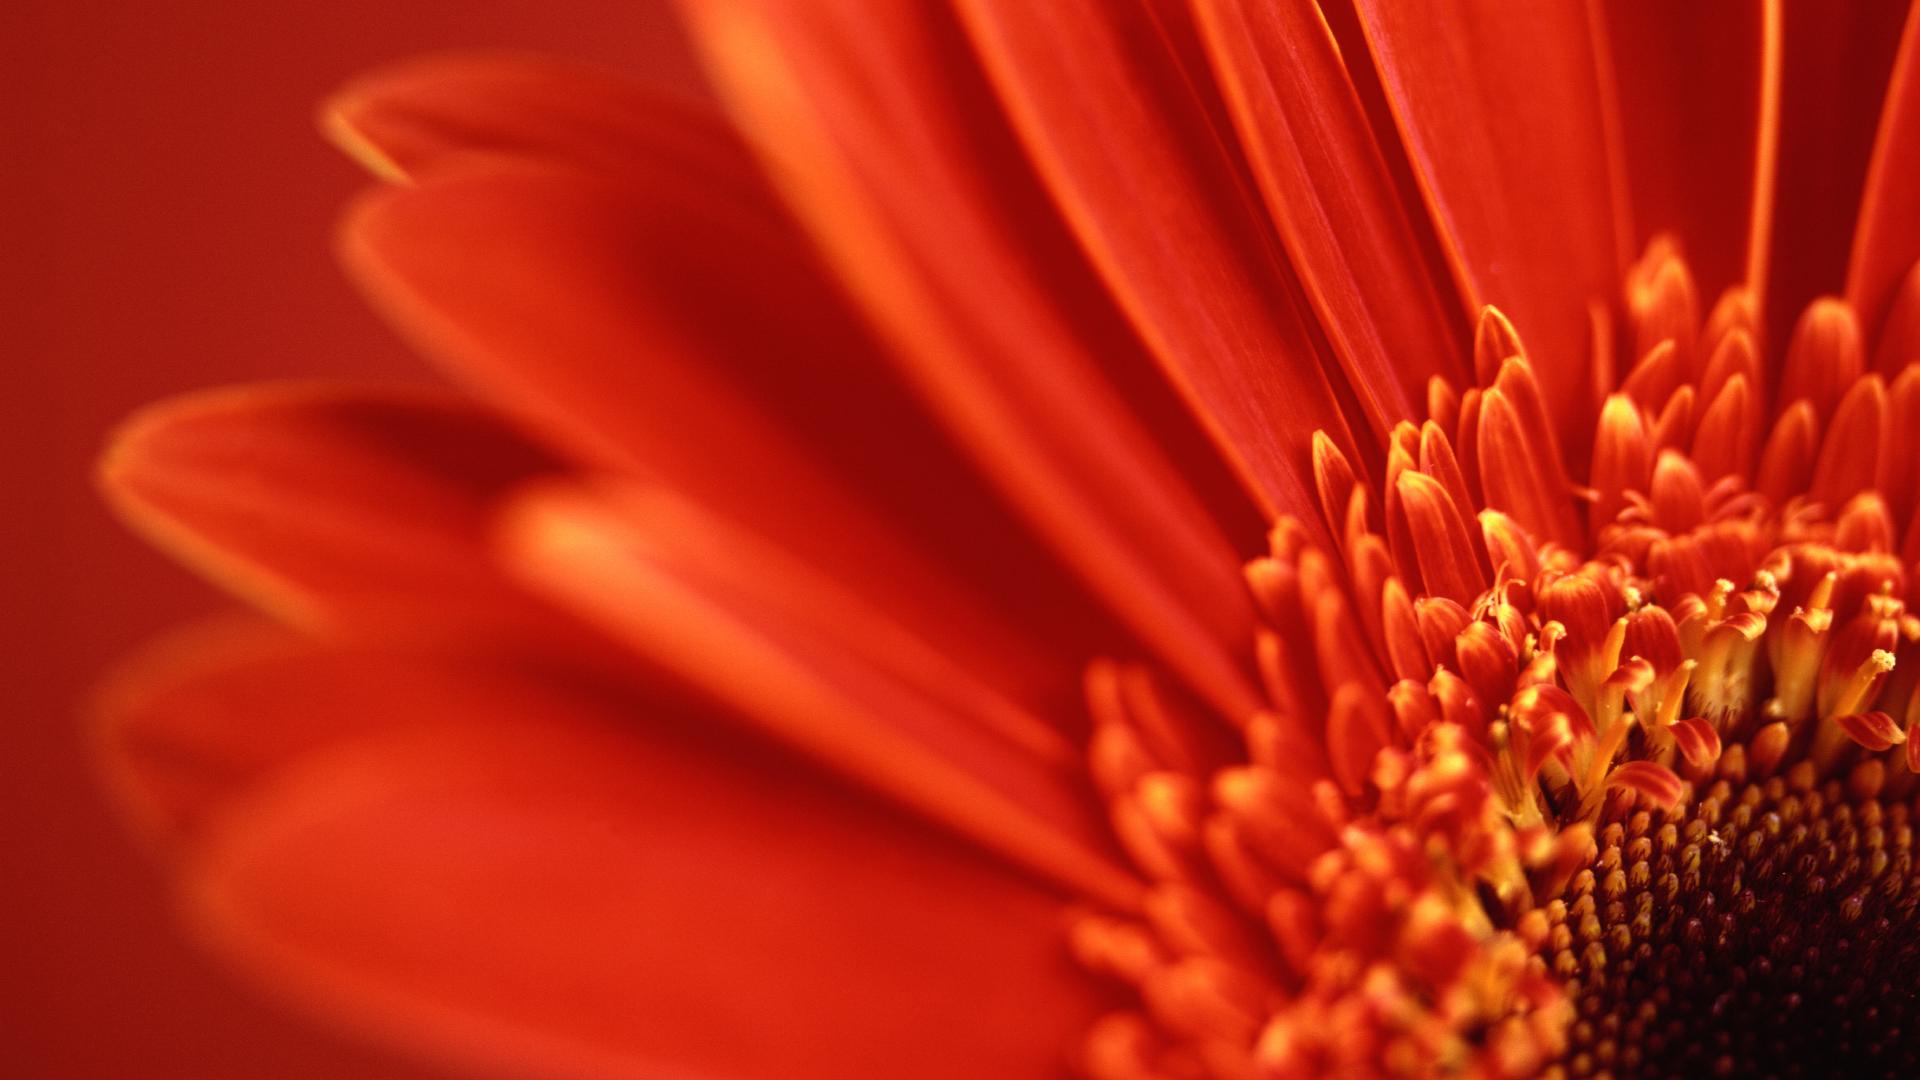 Red Gerbera Daisy Wallpapers HD Wallpapers 1920x1080